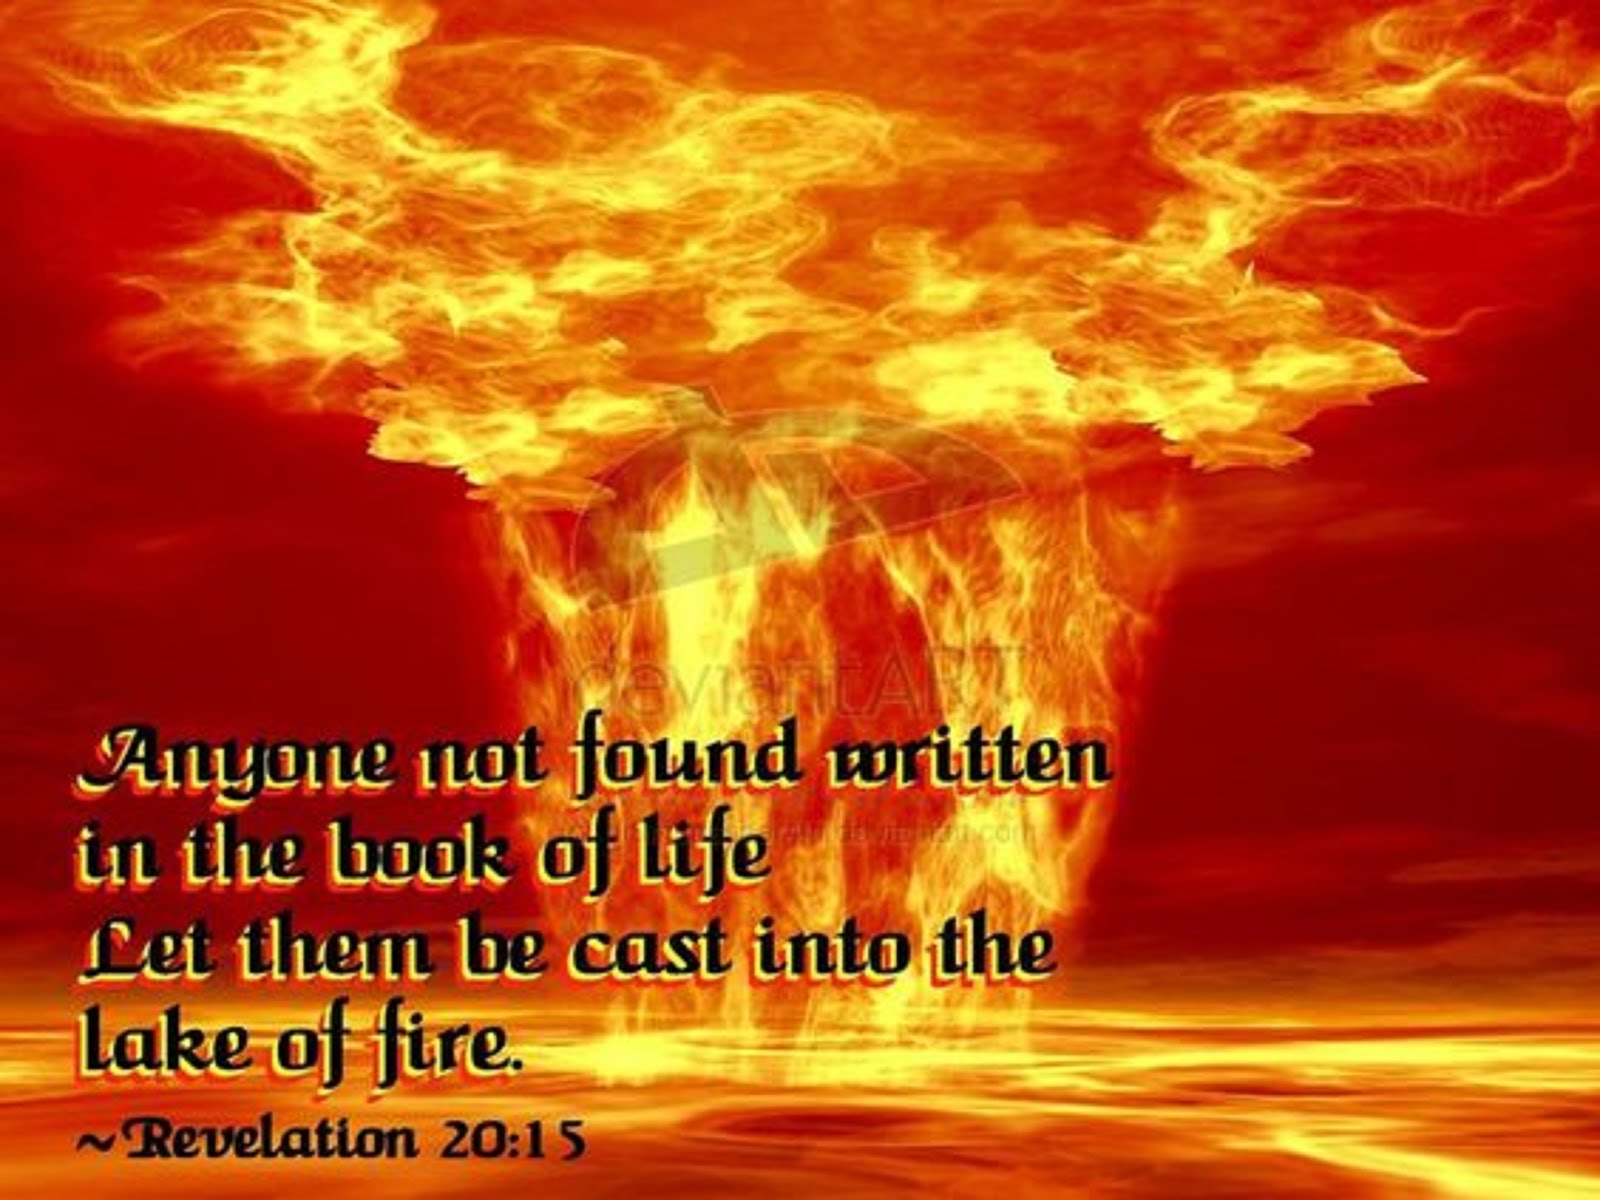 ANYONE NOT FOUND NOT WRITTEN IN THE BOOK OF LIFE  WILL BE THROWN ALIVE INTO THE LAKE OF FIRE